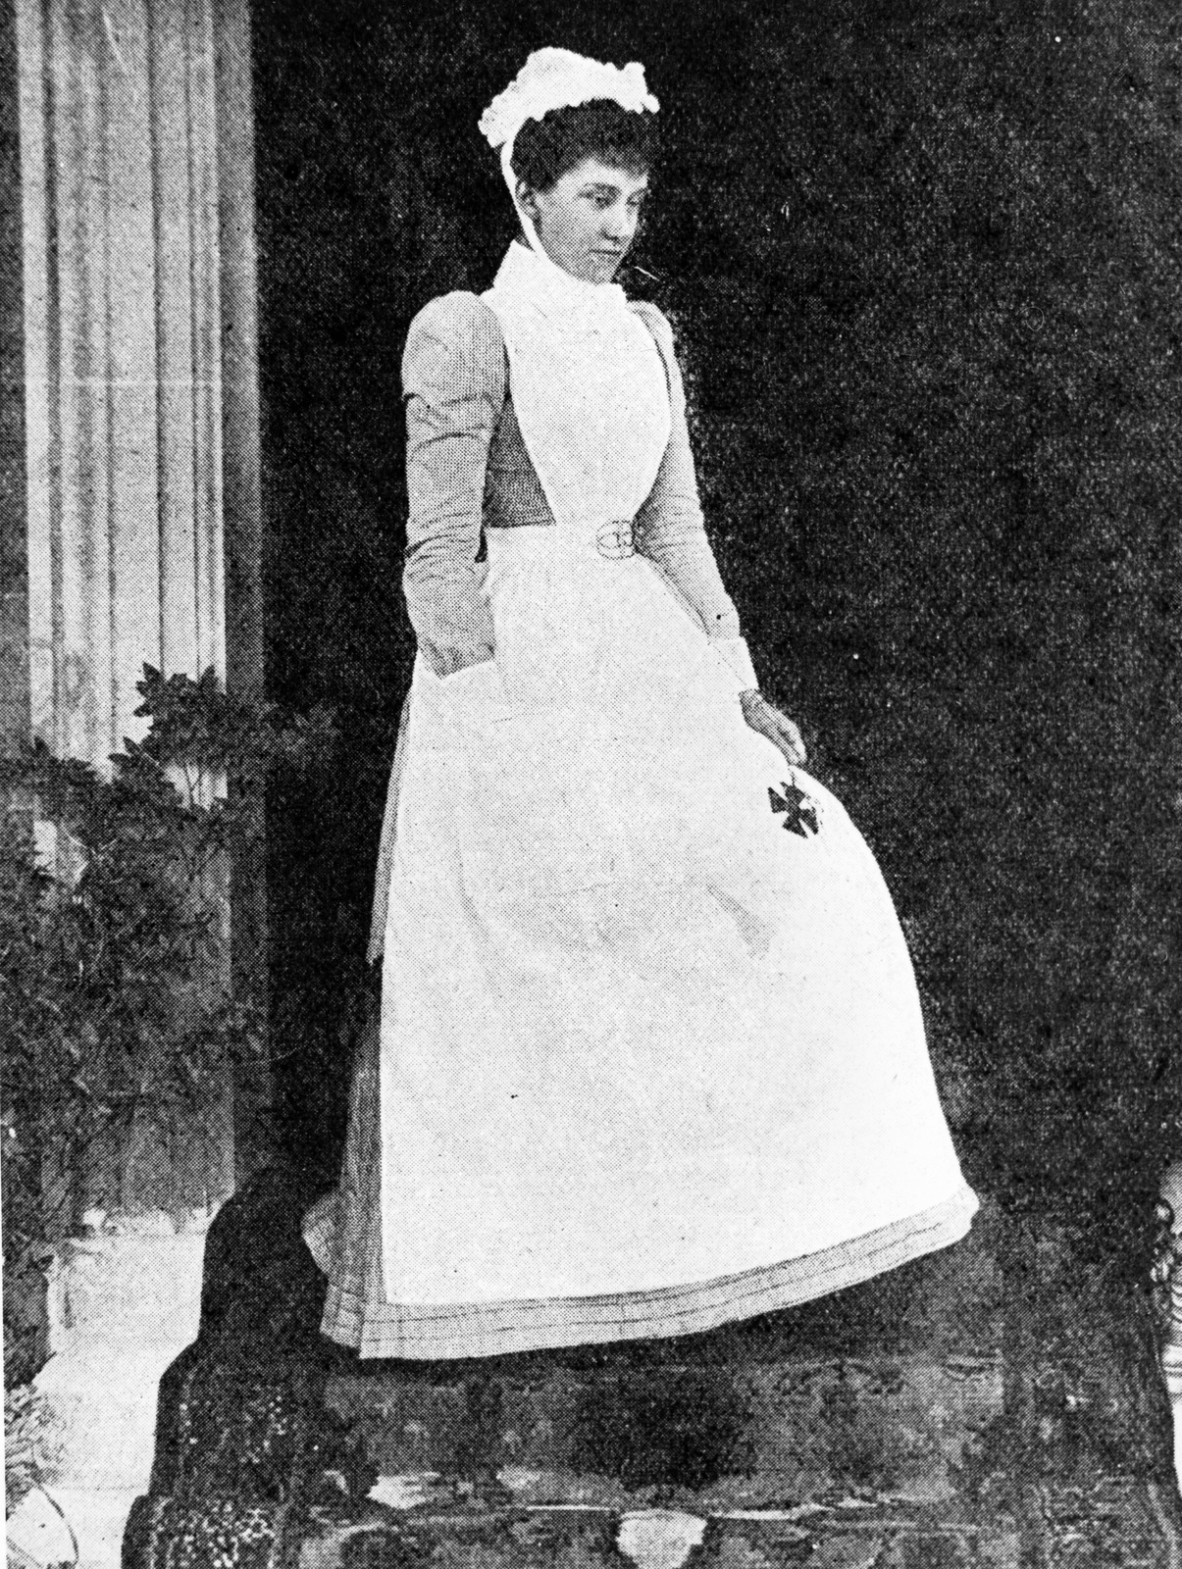 Black and white photograph of a woman dressed in a nurse's uniform typical of the late 1890s..